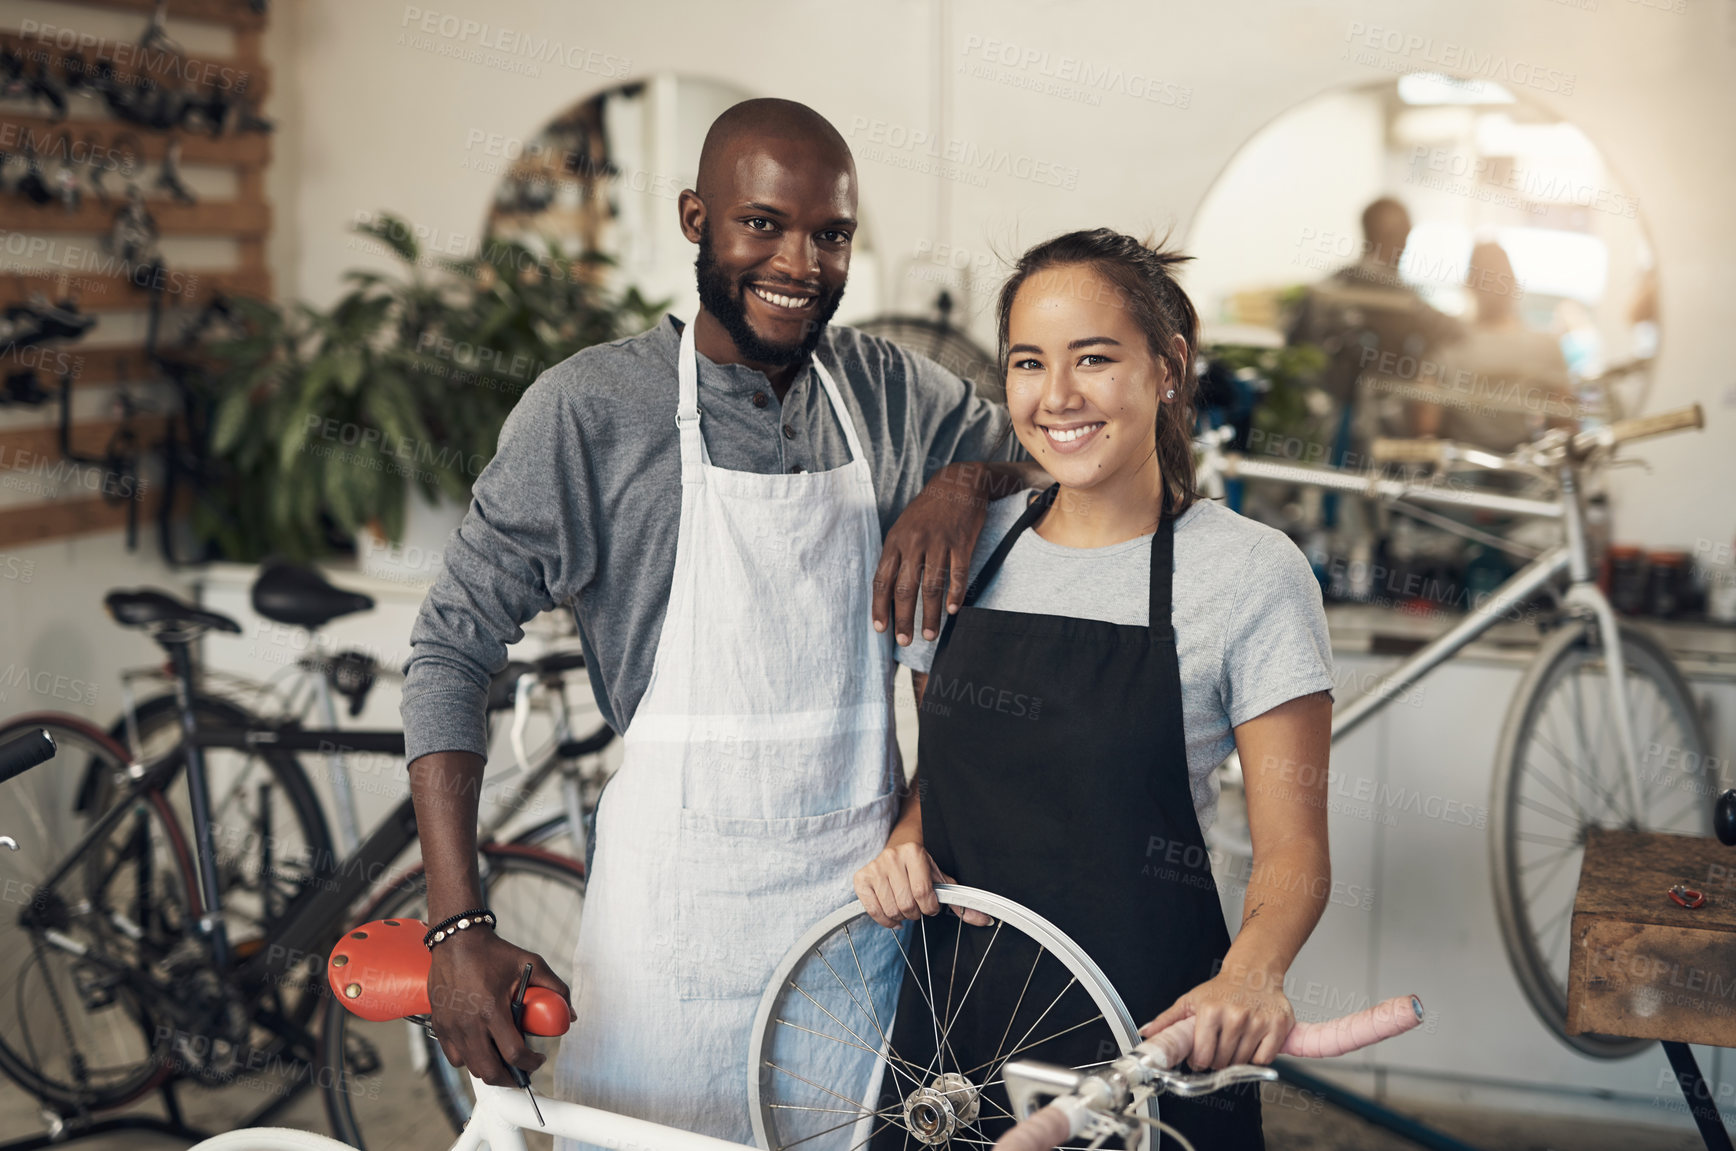 Buy stock photo Portrait of two colleagues fixing a bike at a bicycle repair shop